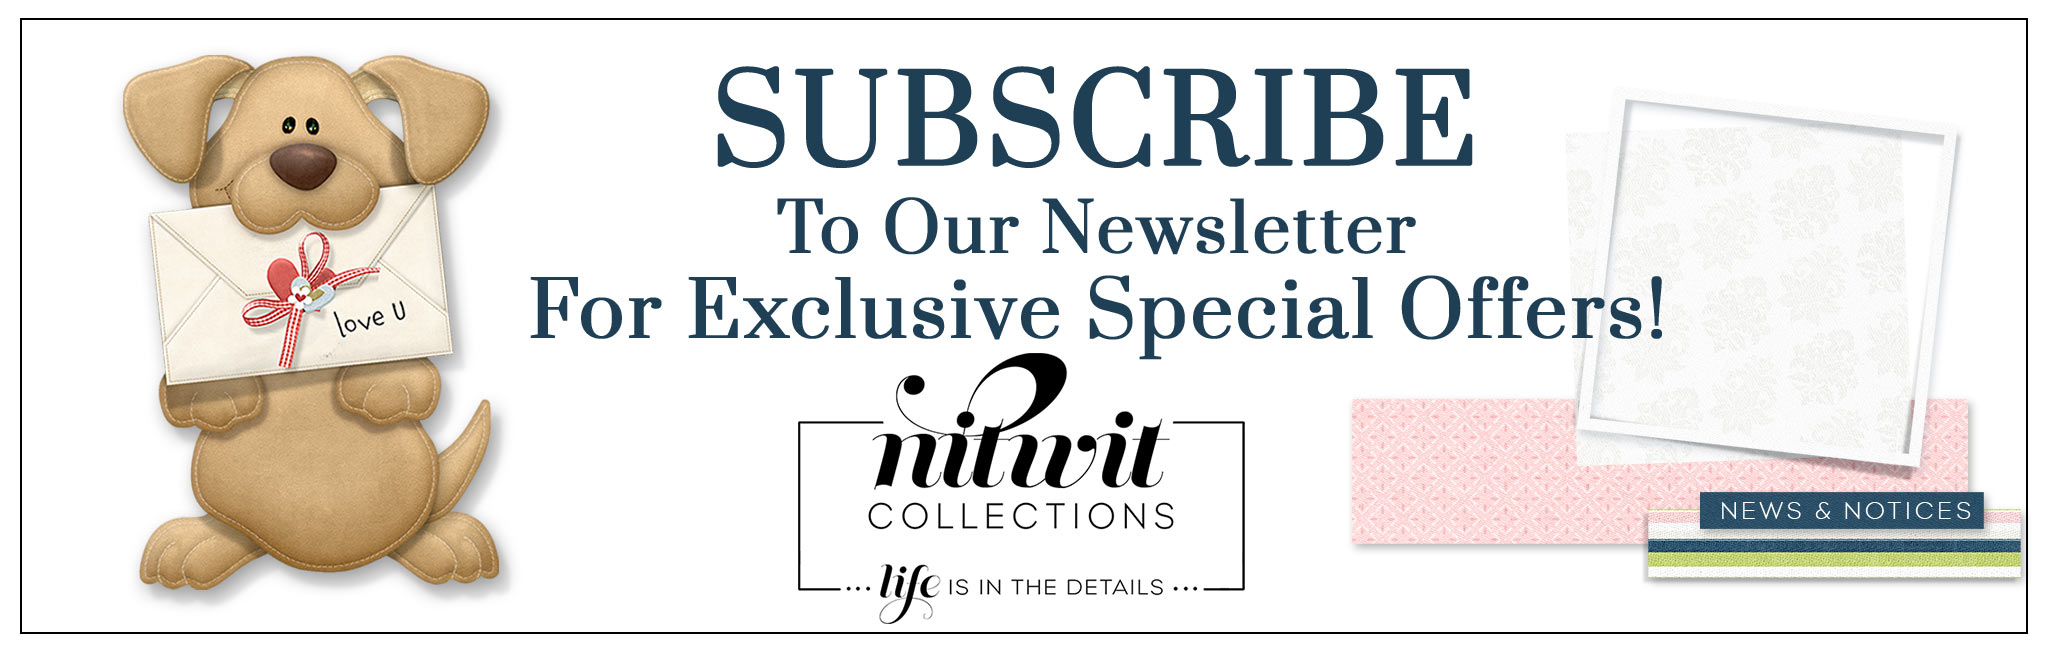 Newsletter Subscribers